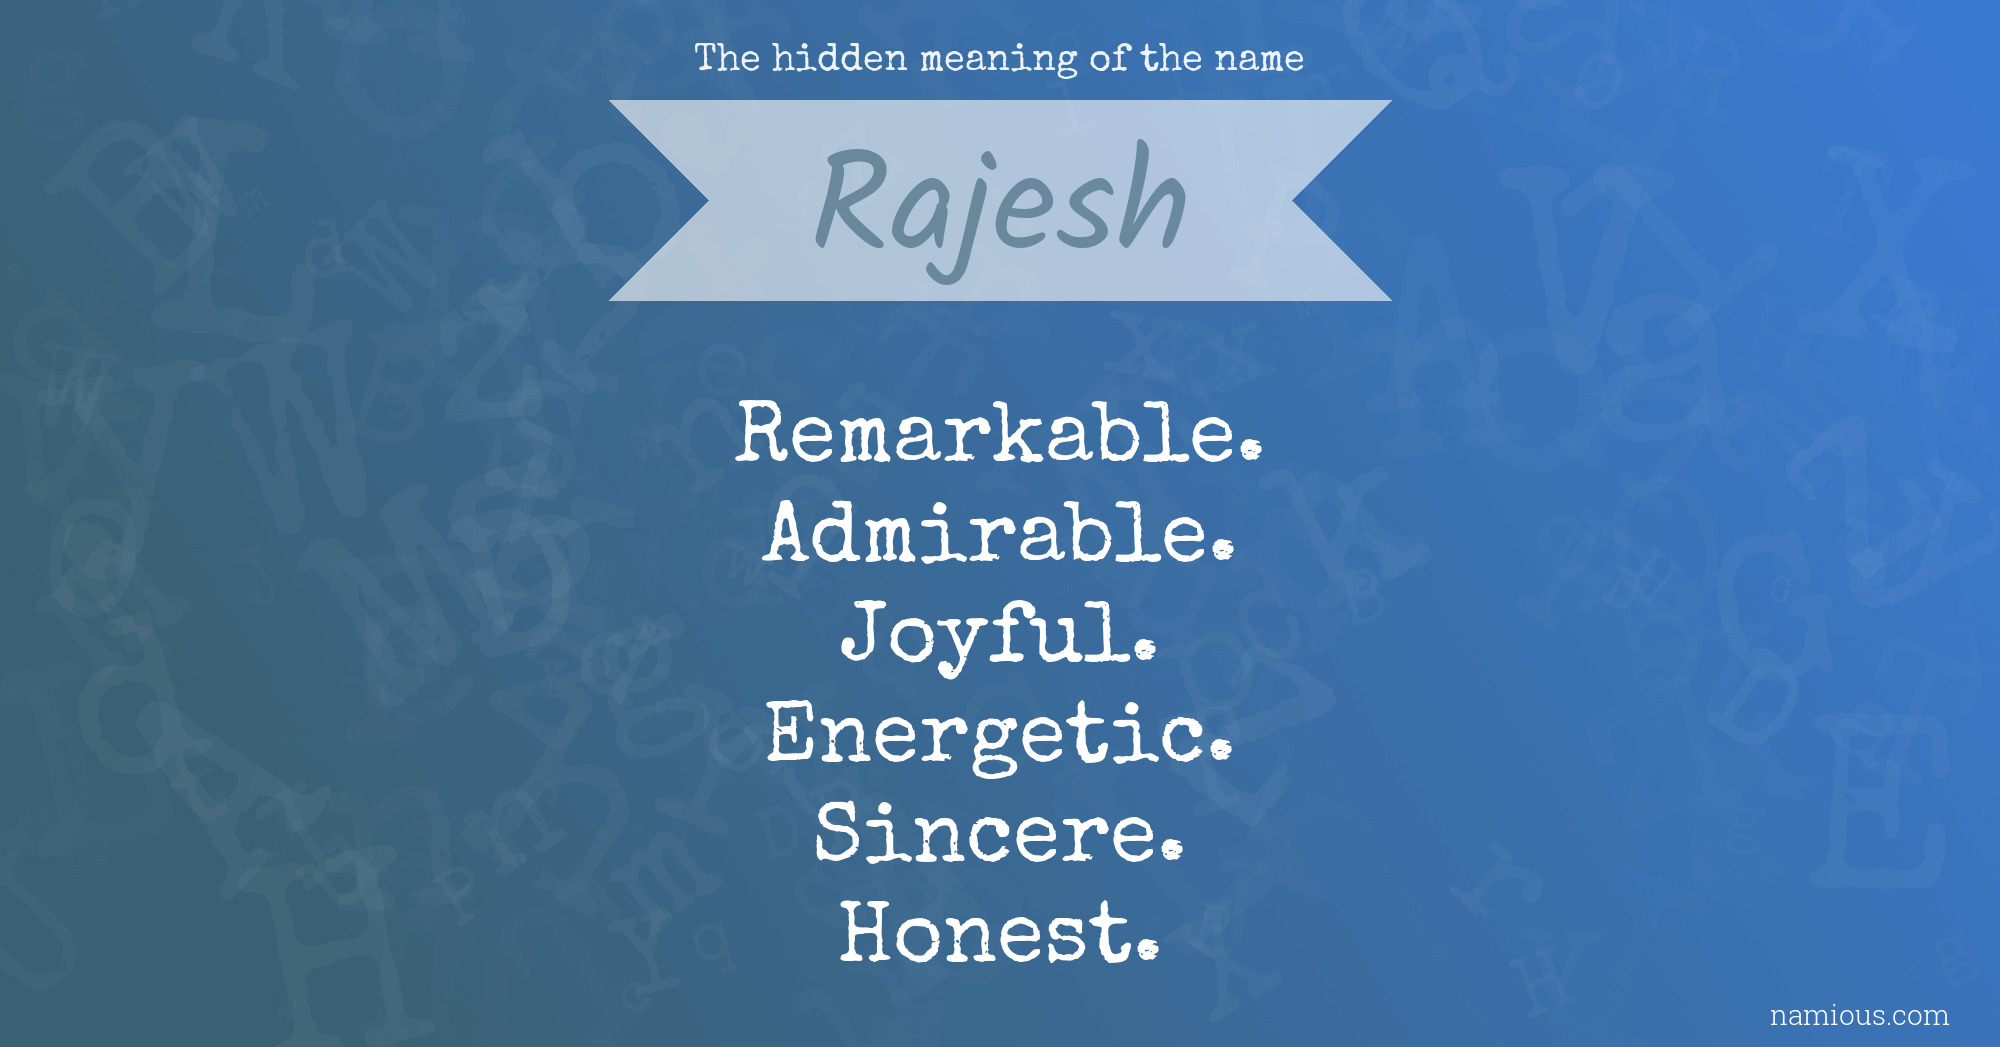 The hidden meaning of the name Rajesh